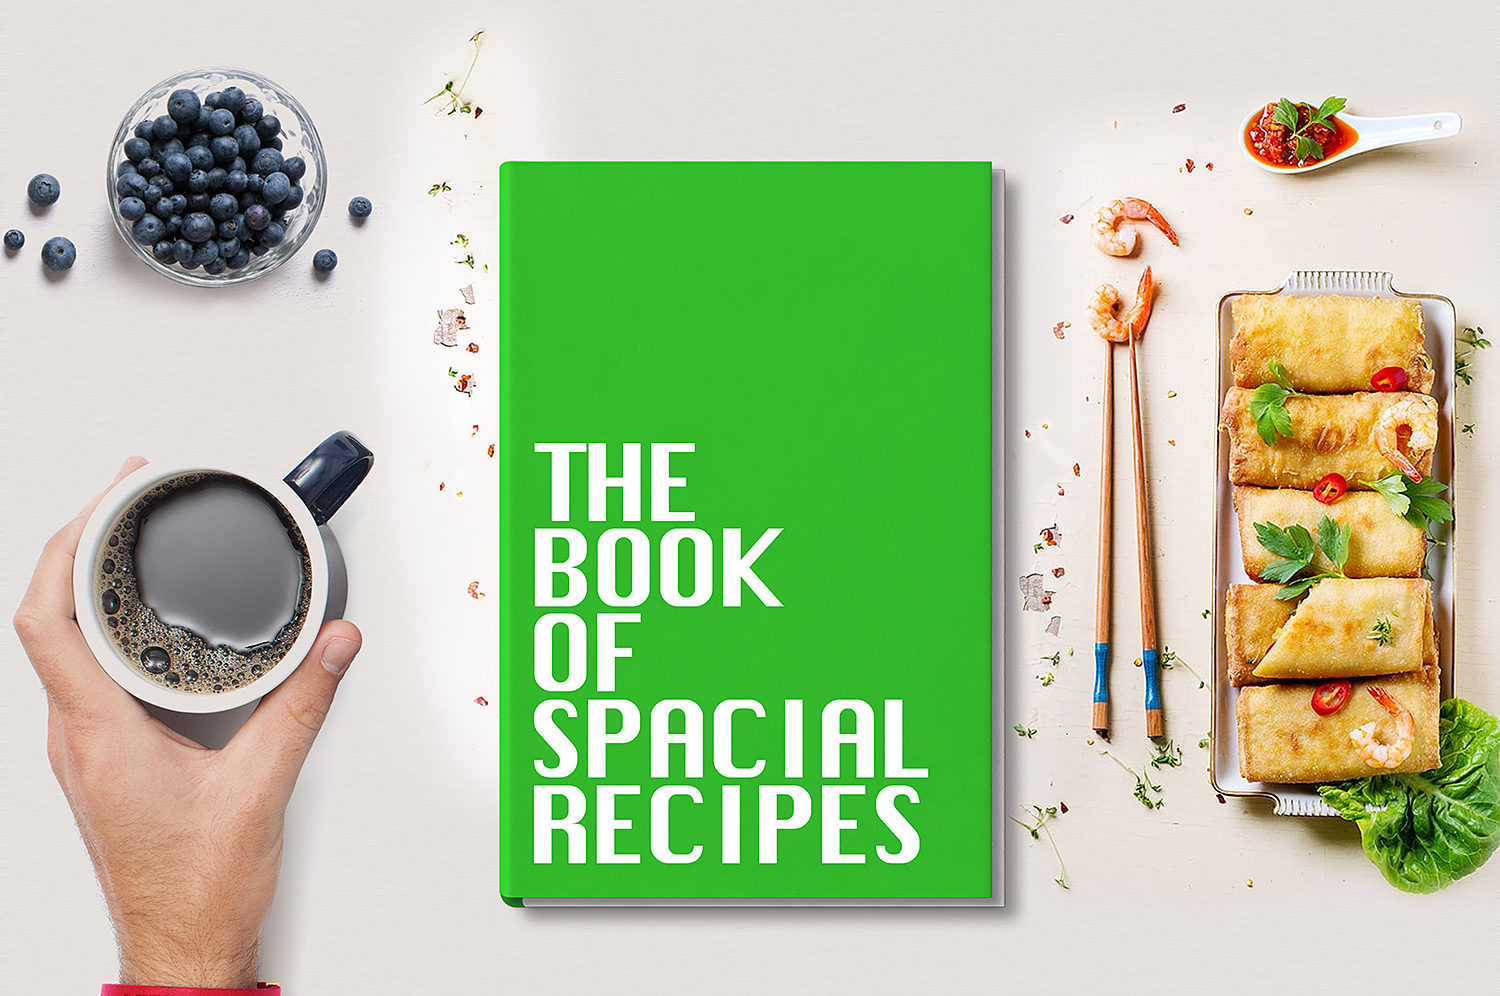 Book Cover with Recipes Free Mockup